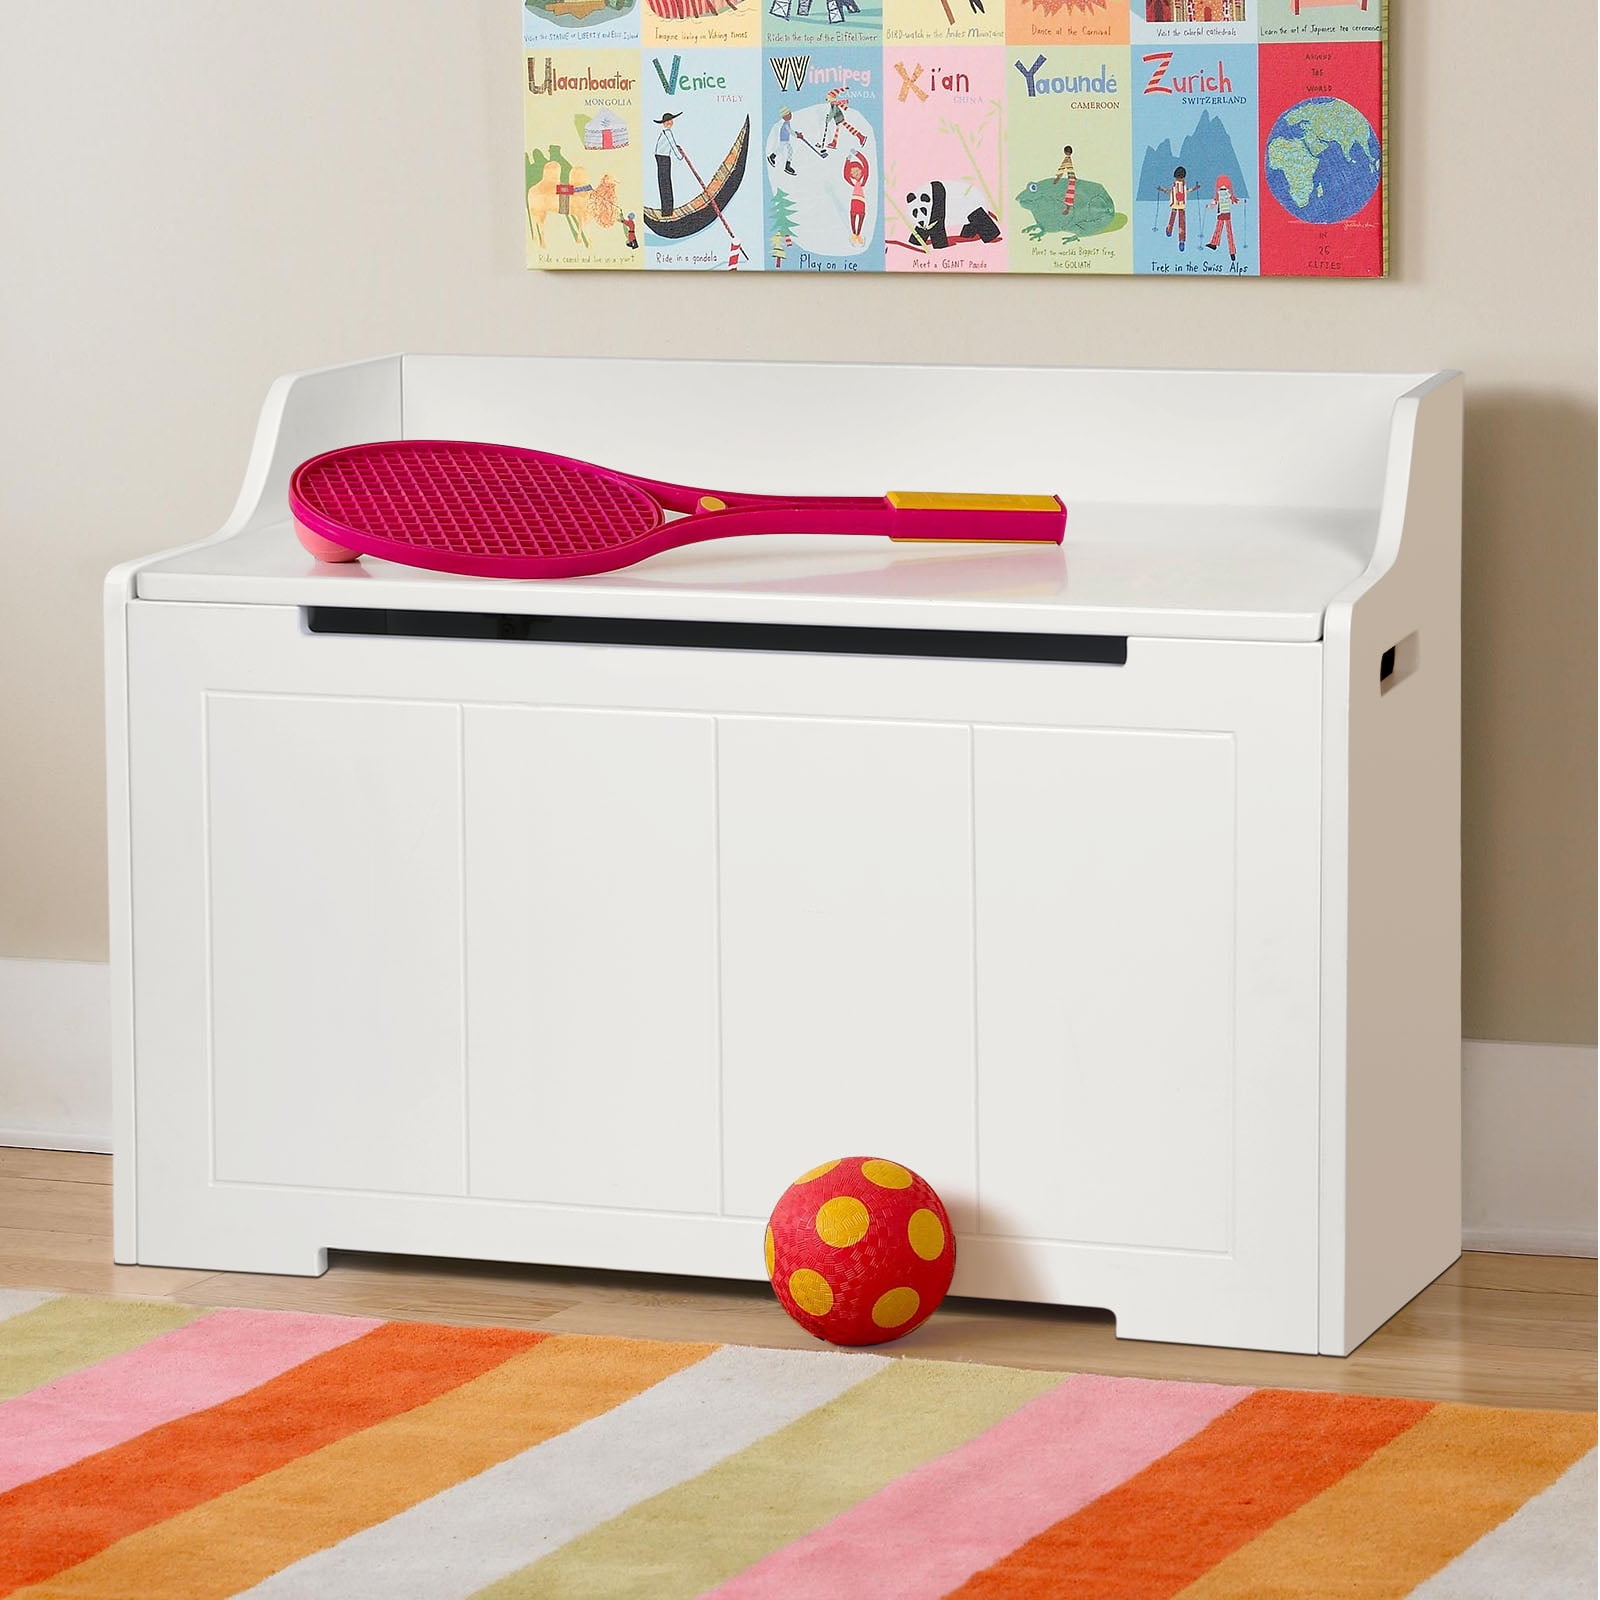 Toy Chest & Storage Trunk with Safety Hinge Simple White Storage Chest 30’’ Wooden Storage Chest Bench WillBee Toy Box for Kids Boys,Girls